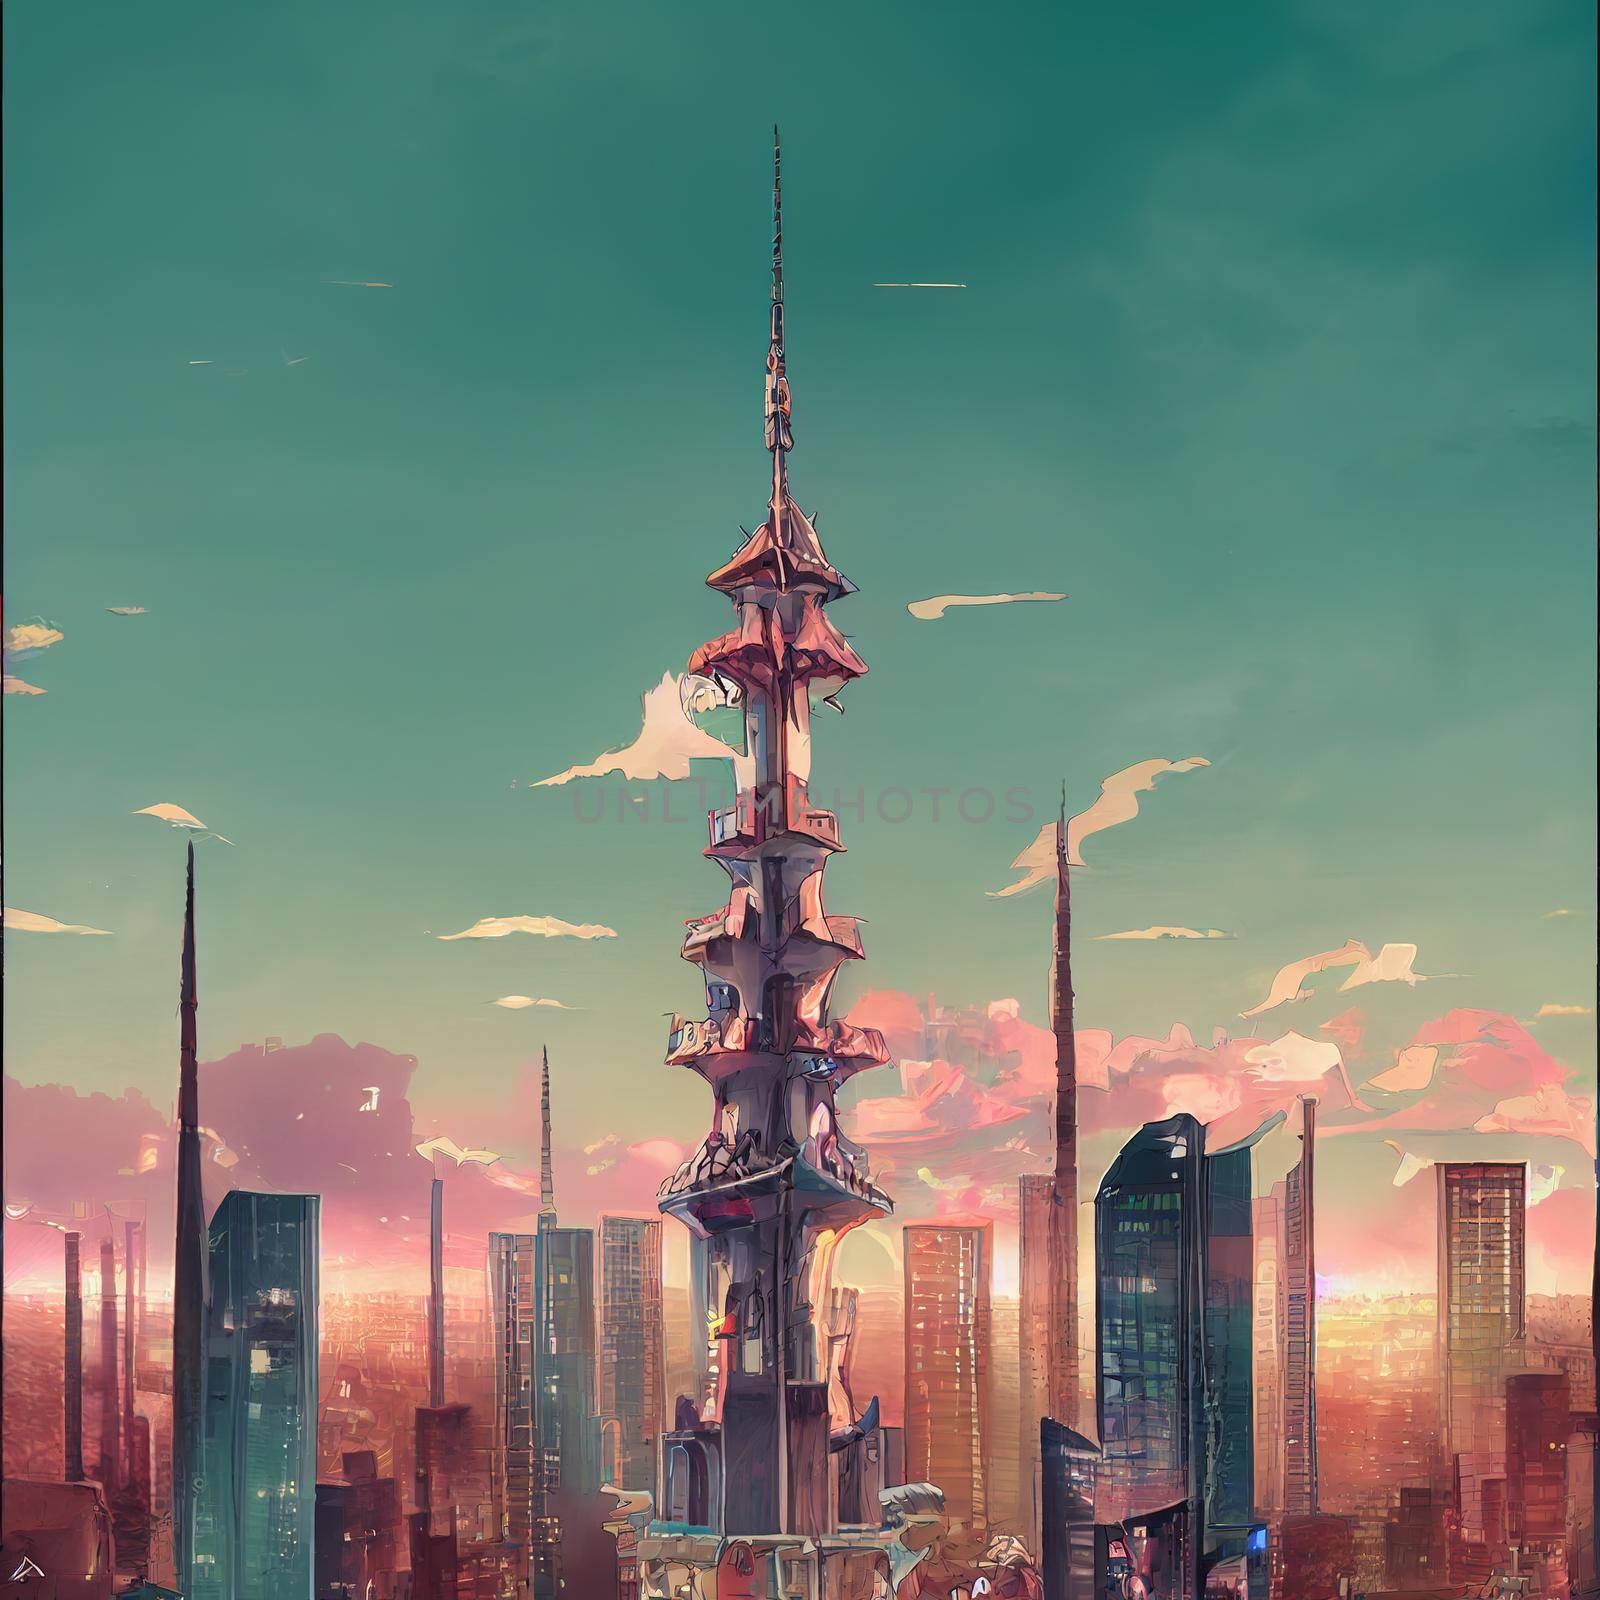 anime style city with futuristic skycrappers by 2ragon